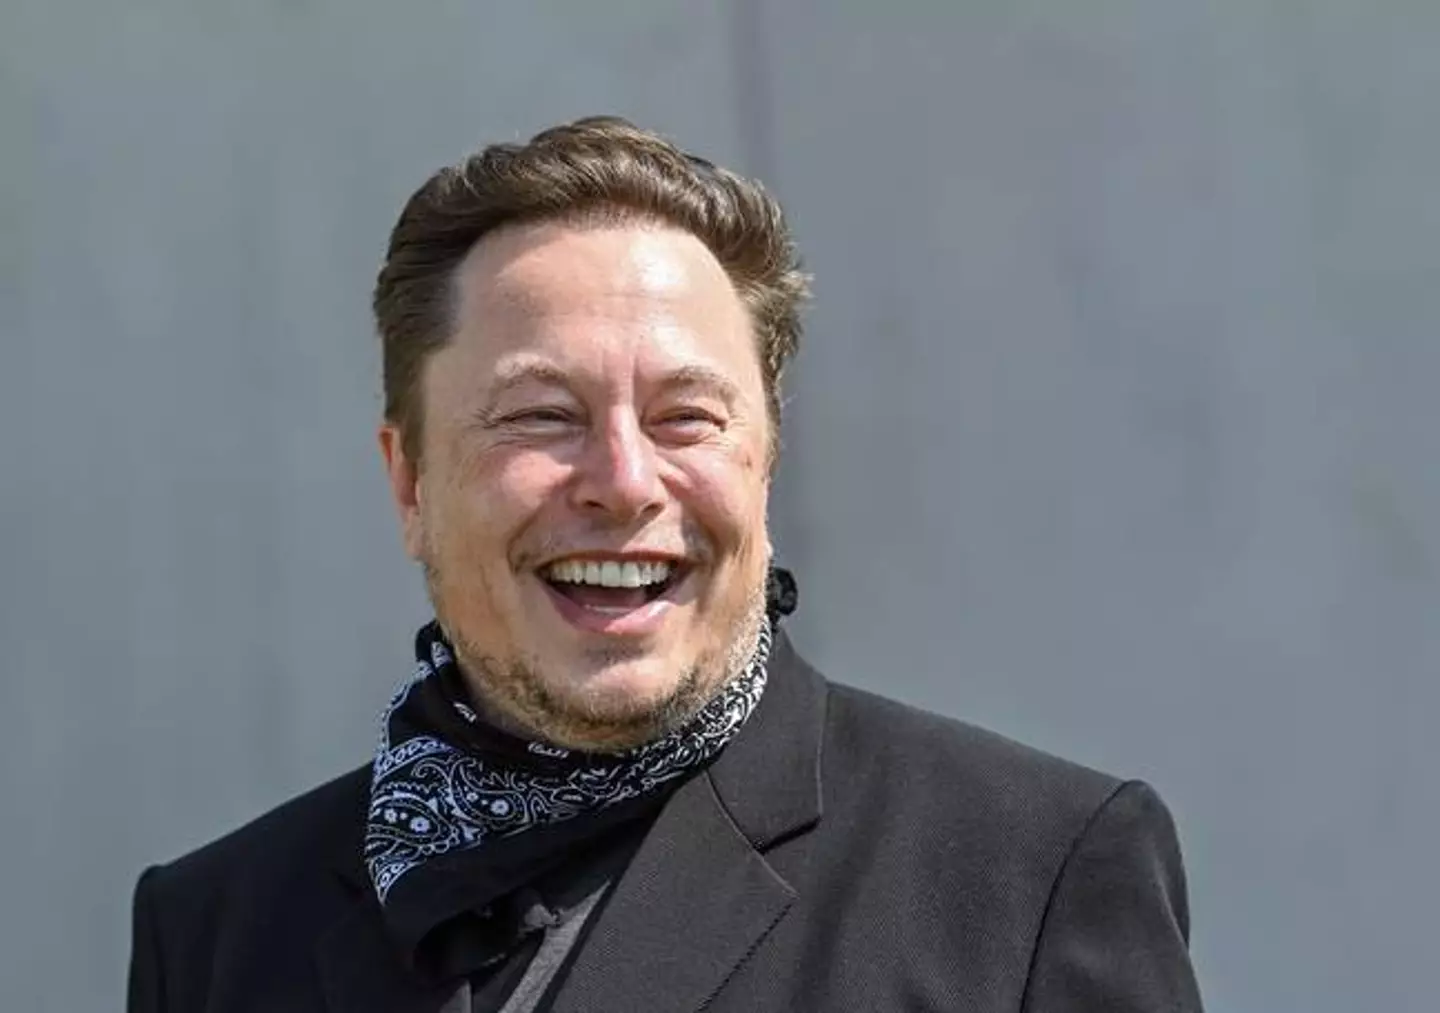 Elon Musk is now the world's richest man, according to Forbes.